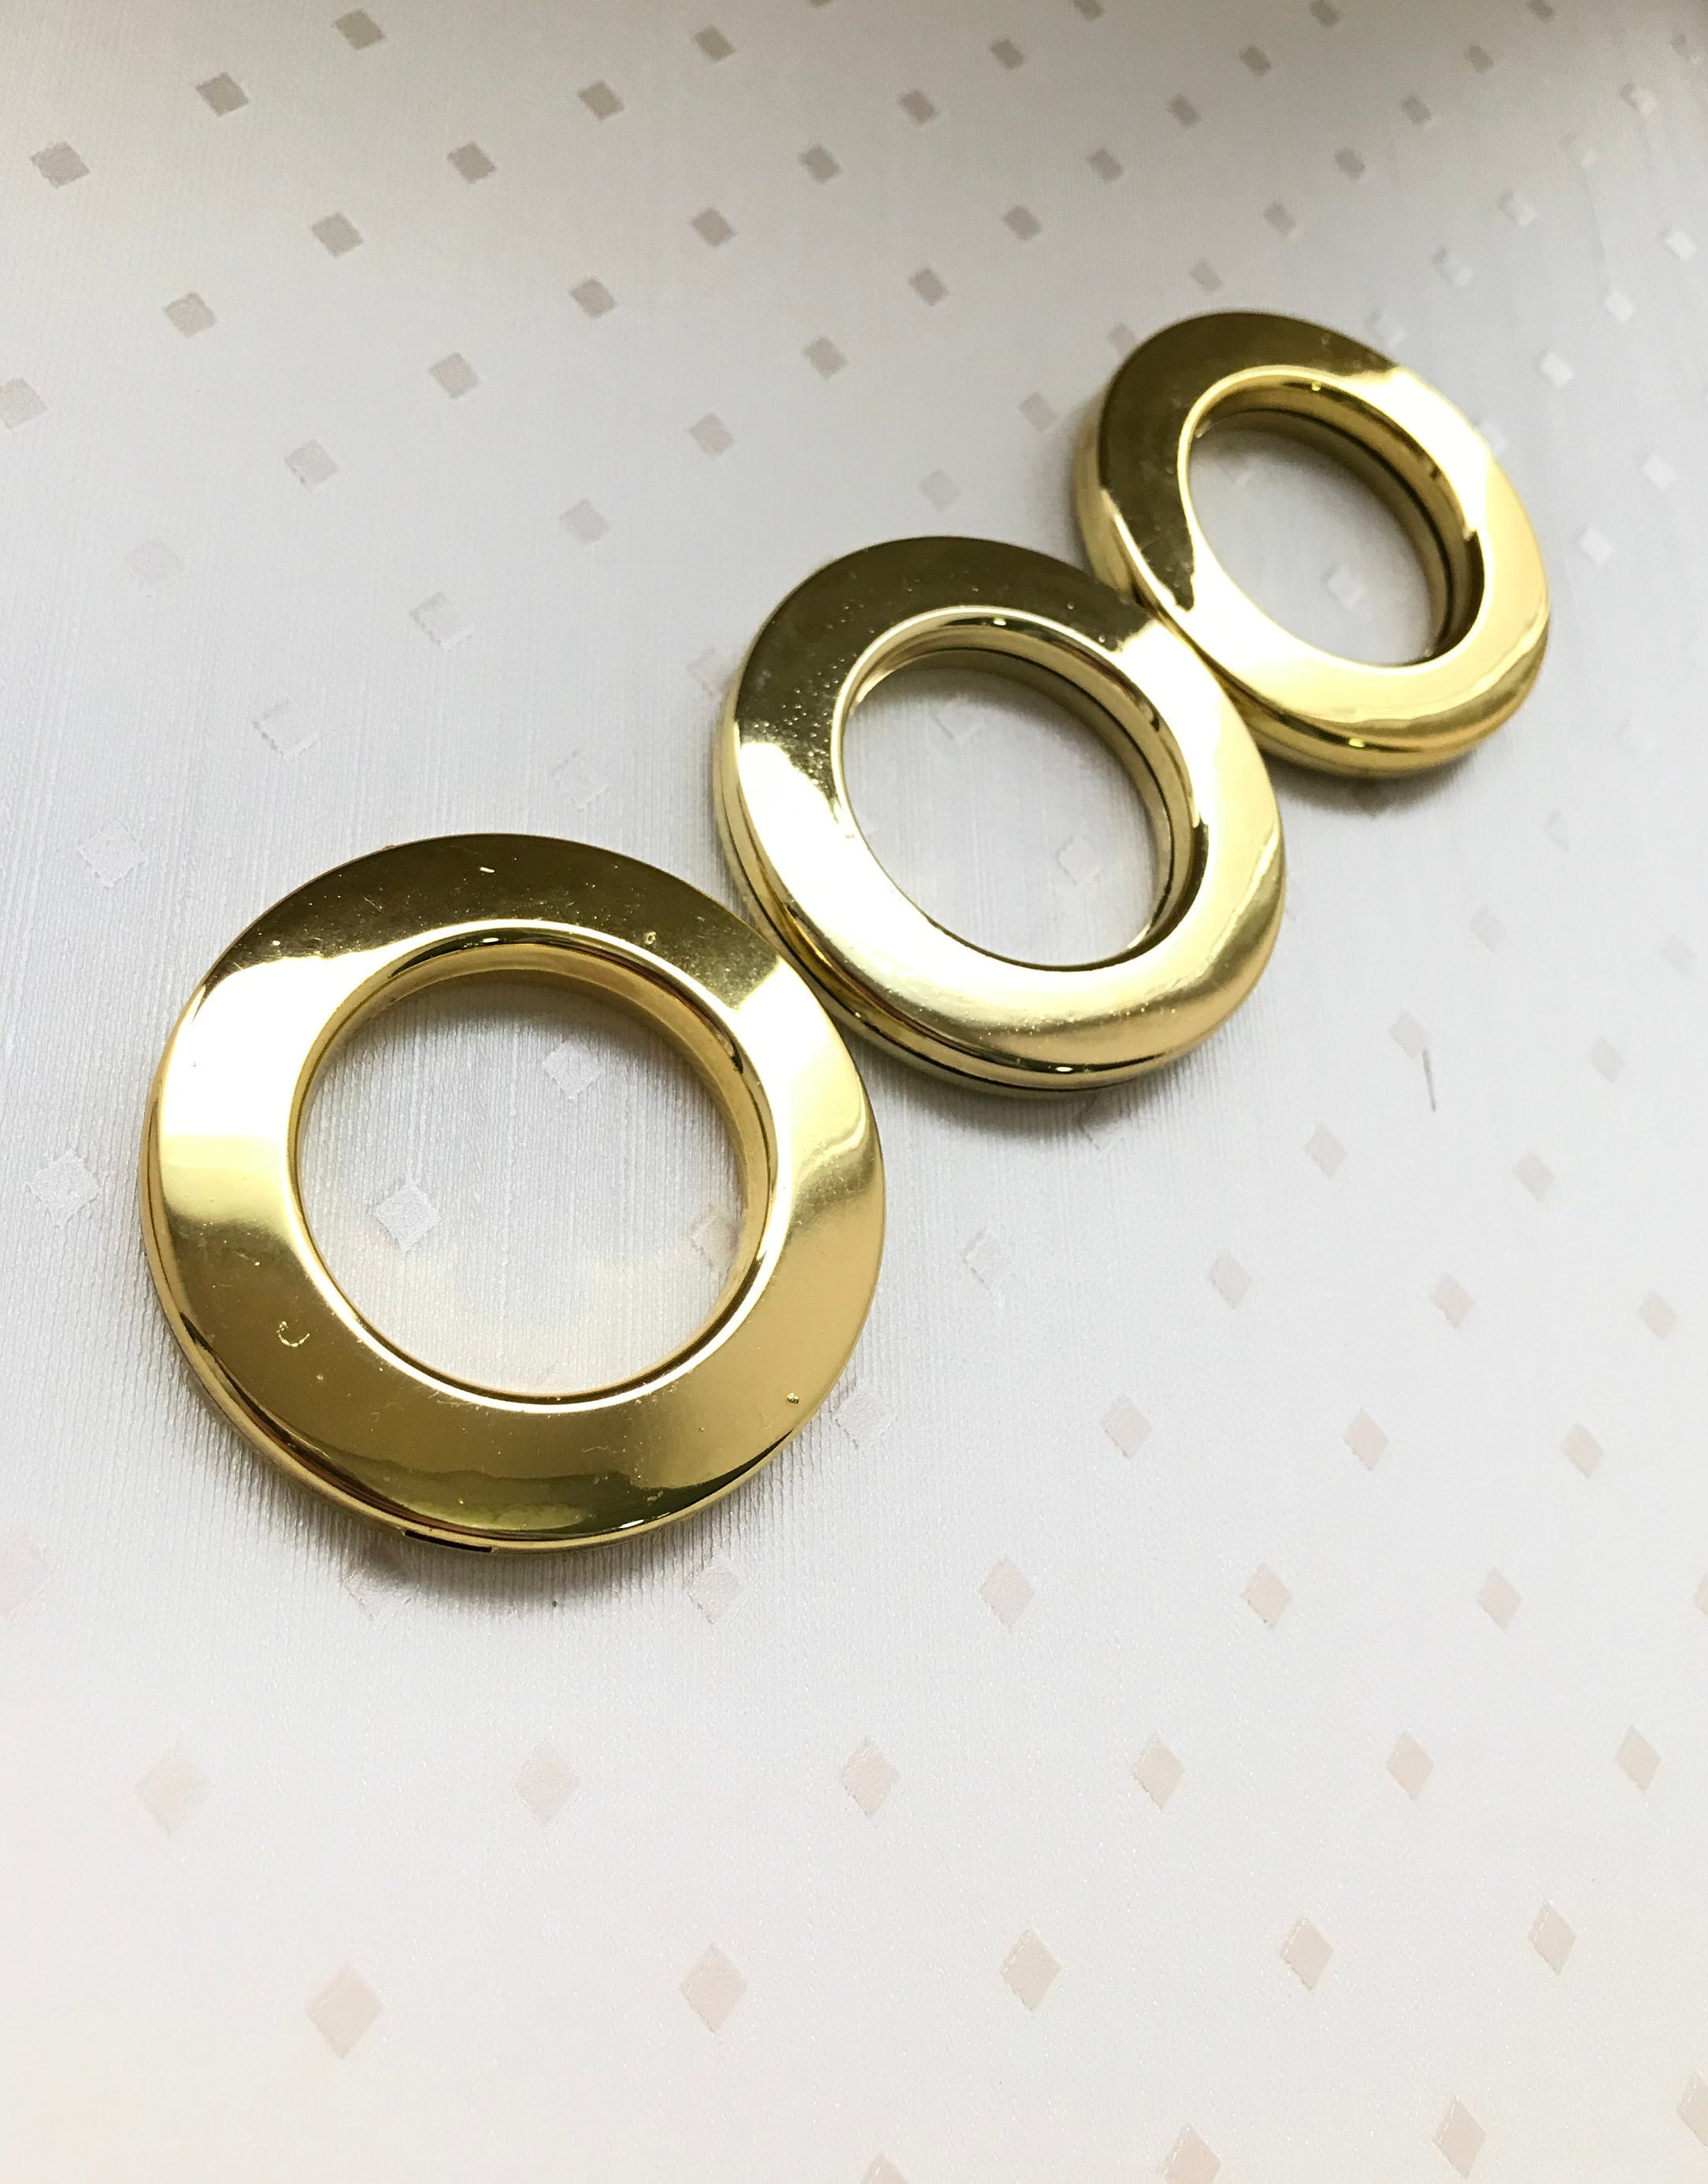 Buy Wenkoni Metal Curtain Rings,Eyelet Rings 1.5-Inch(38mm) Inner  Diameter,Set of 20.(Color:White) Online at Low Prices in India - Amazon.in